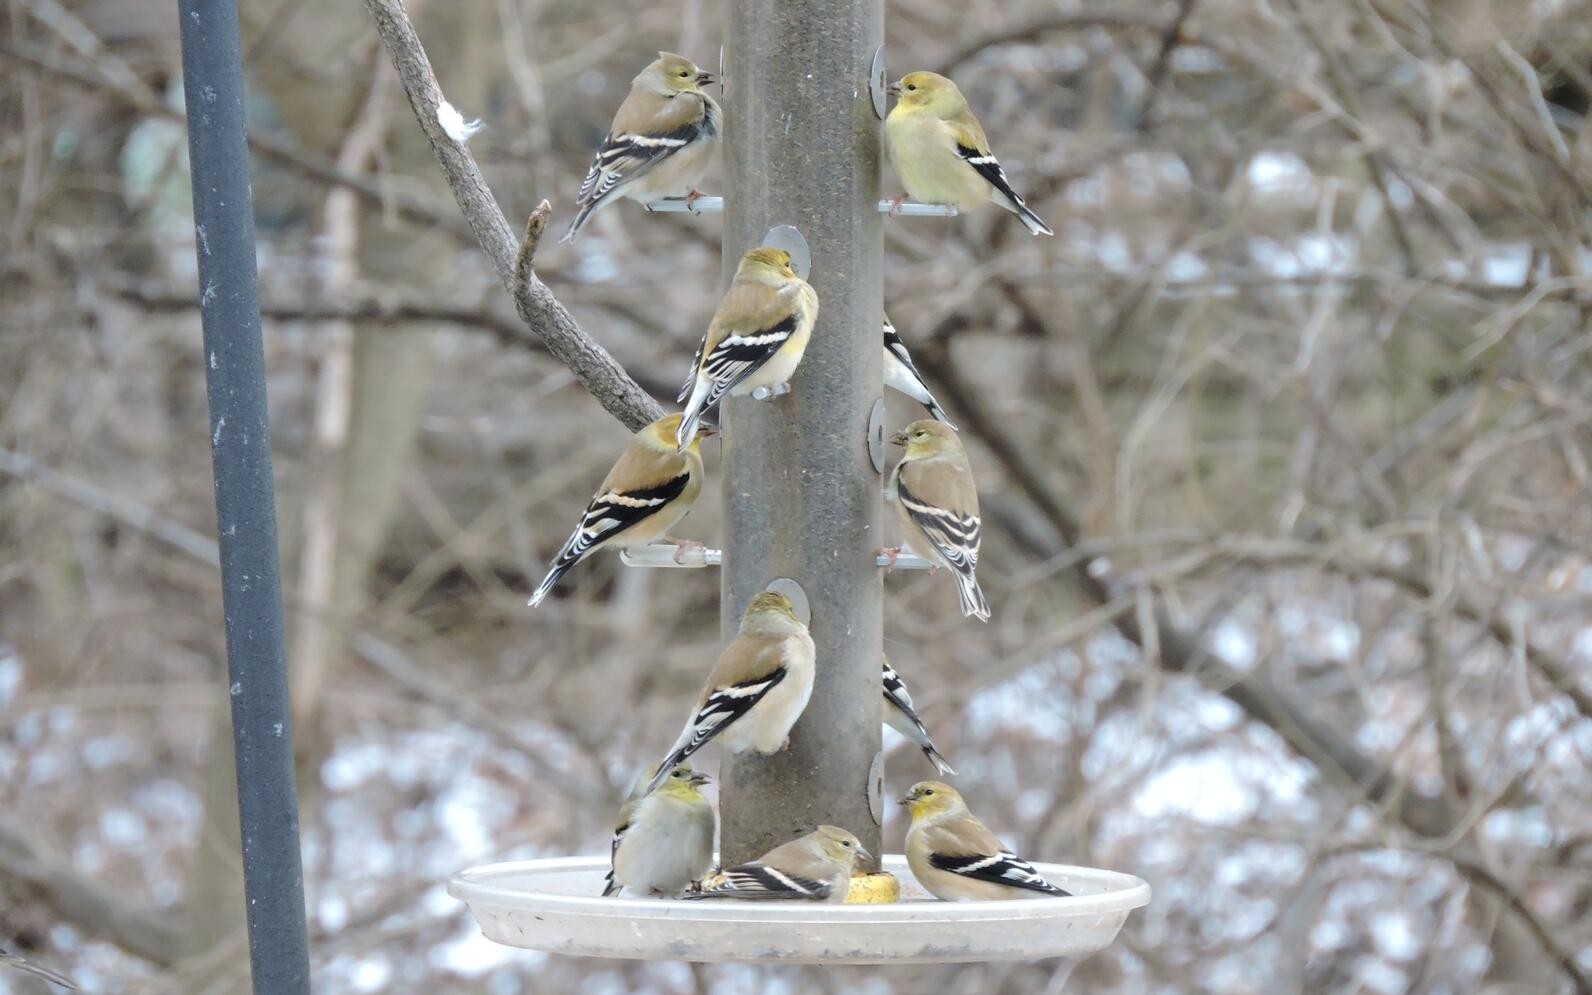 Eleven American Goldfinches visit a tube feeder in winter plumage. They have yellow washed heads, brown backs, black wings with white wing bars, and white, tan and yellow-washed bellies. 